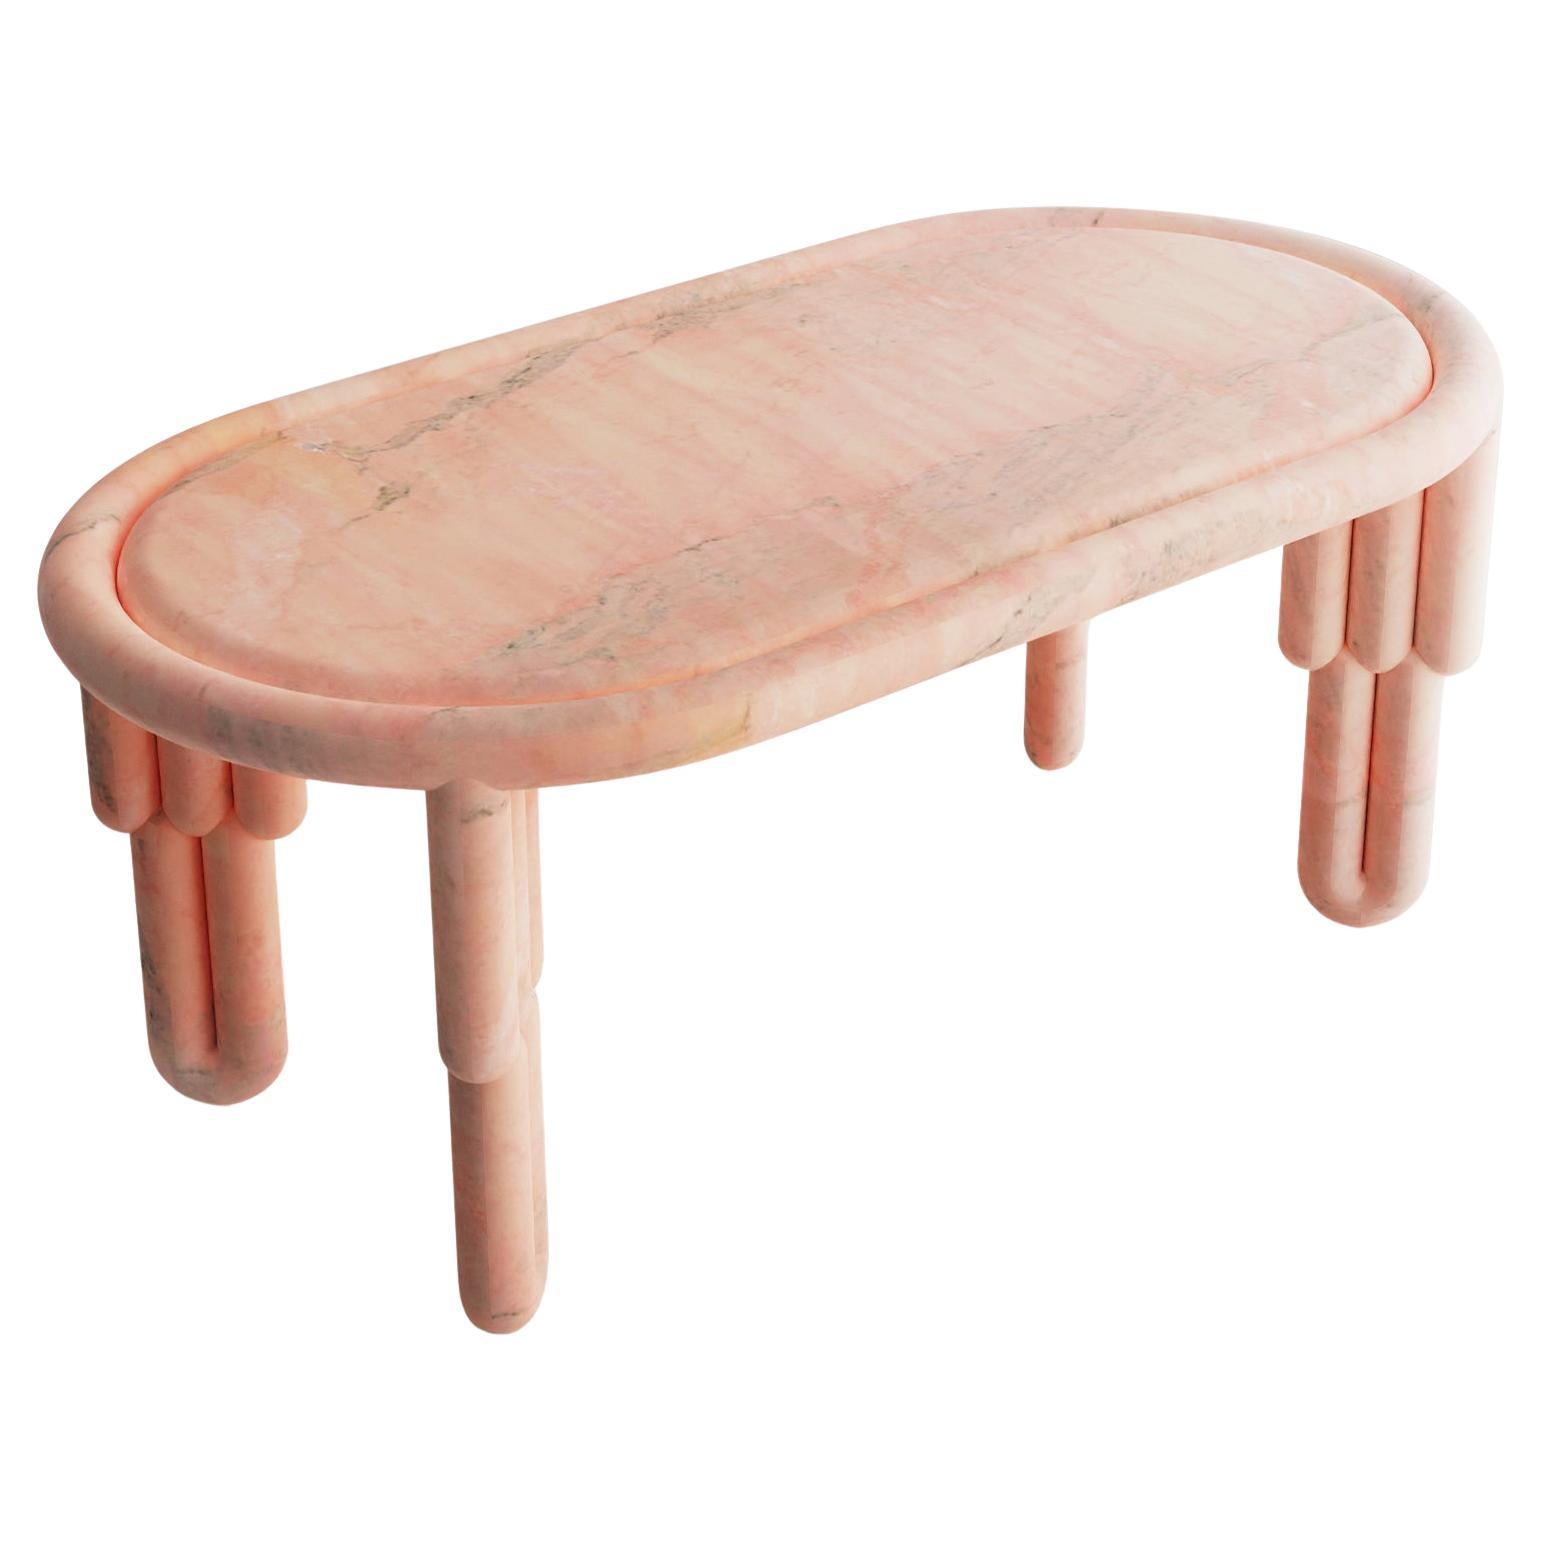 Sculptural Kipferl Dining Table by Lara Bohinc in Rosa Portugalo Marble For Sale